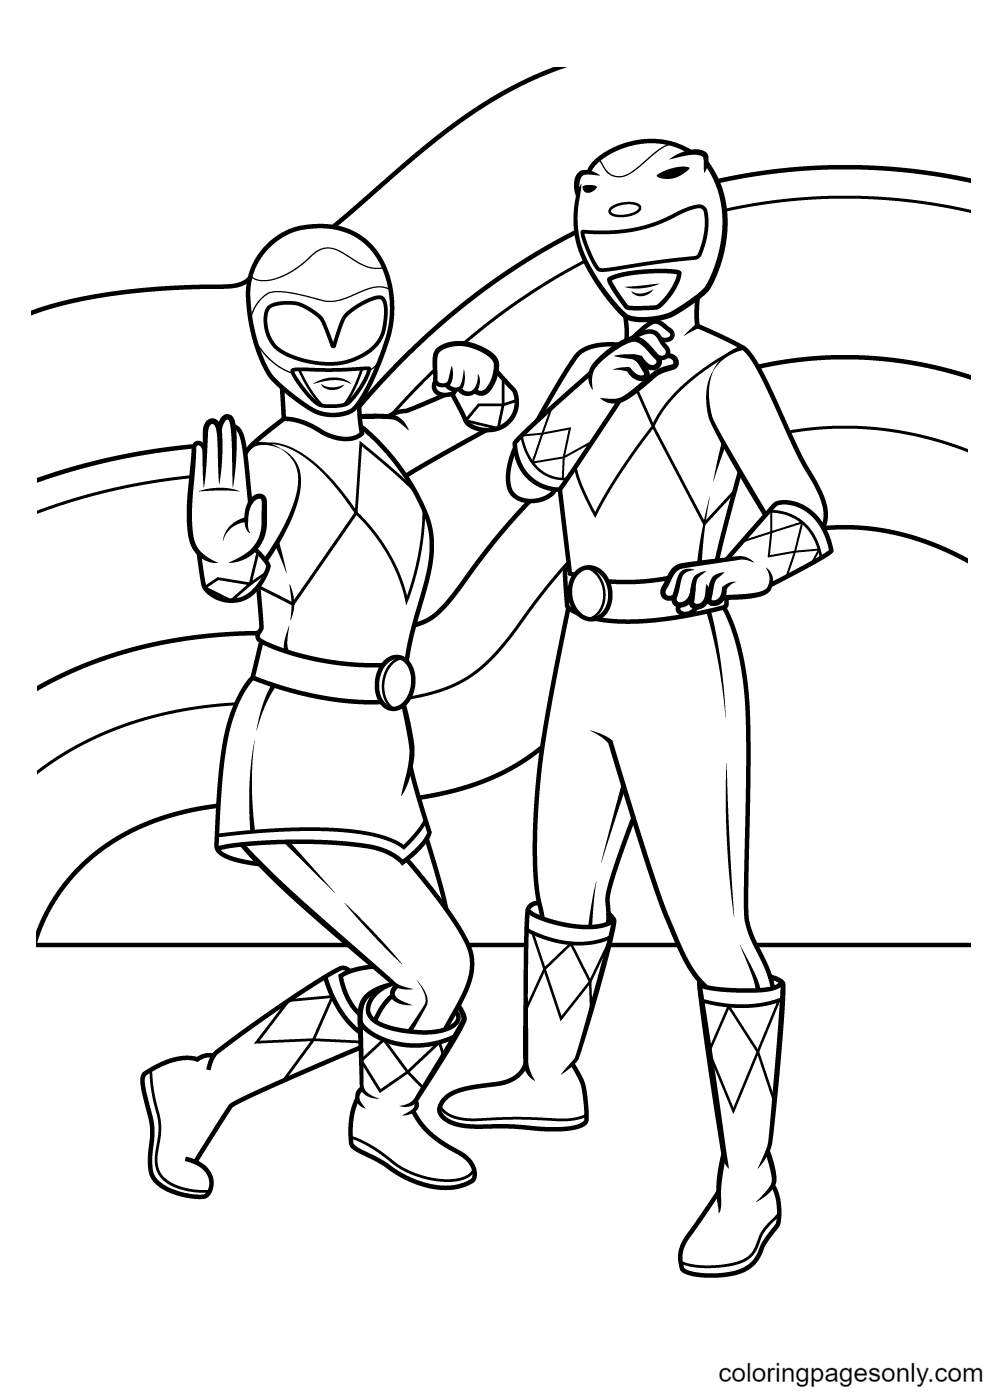 Pink Ranger and Yellow Ranger from Power Rangers